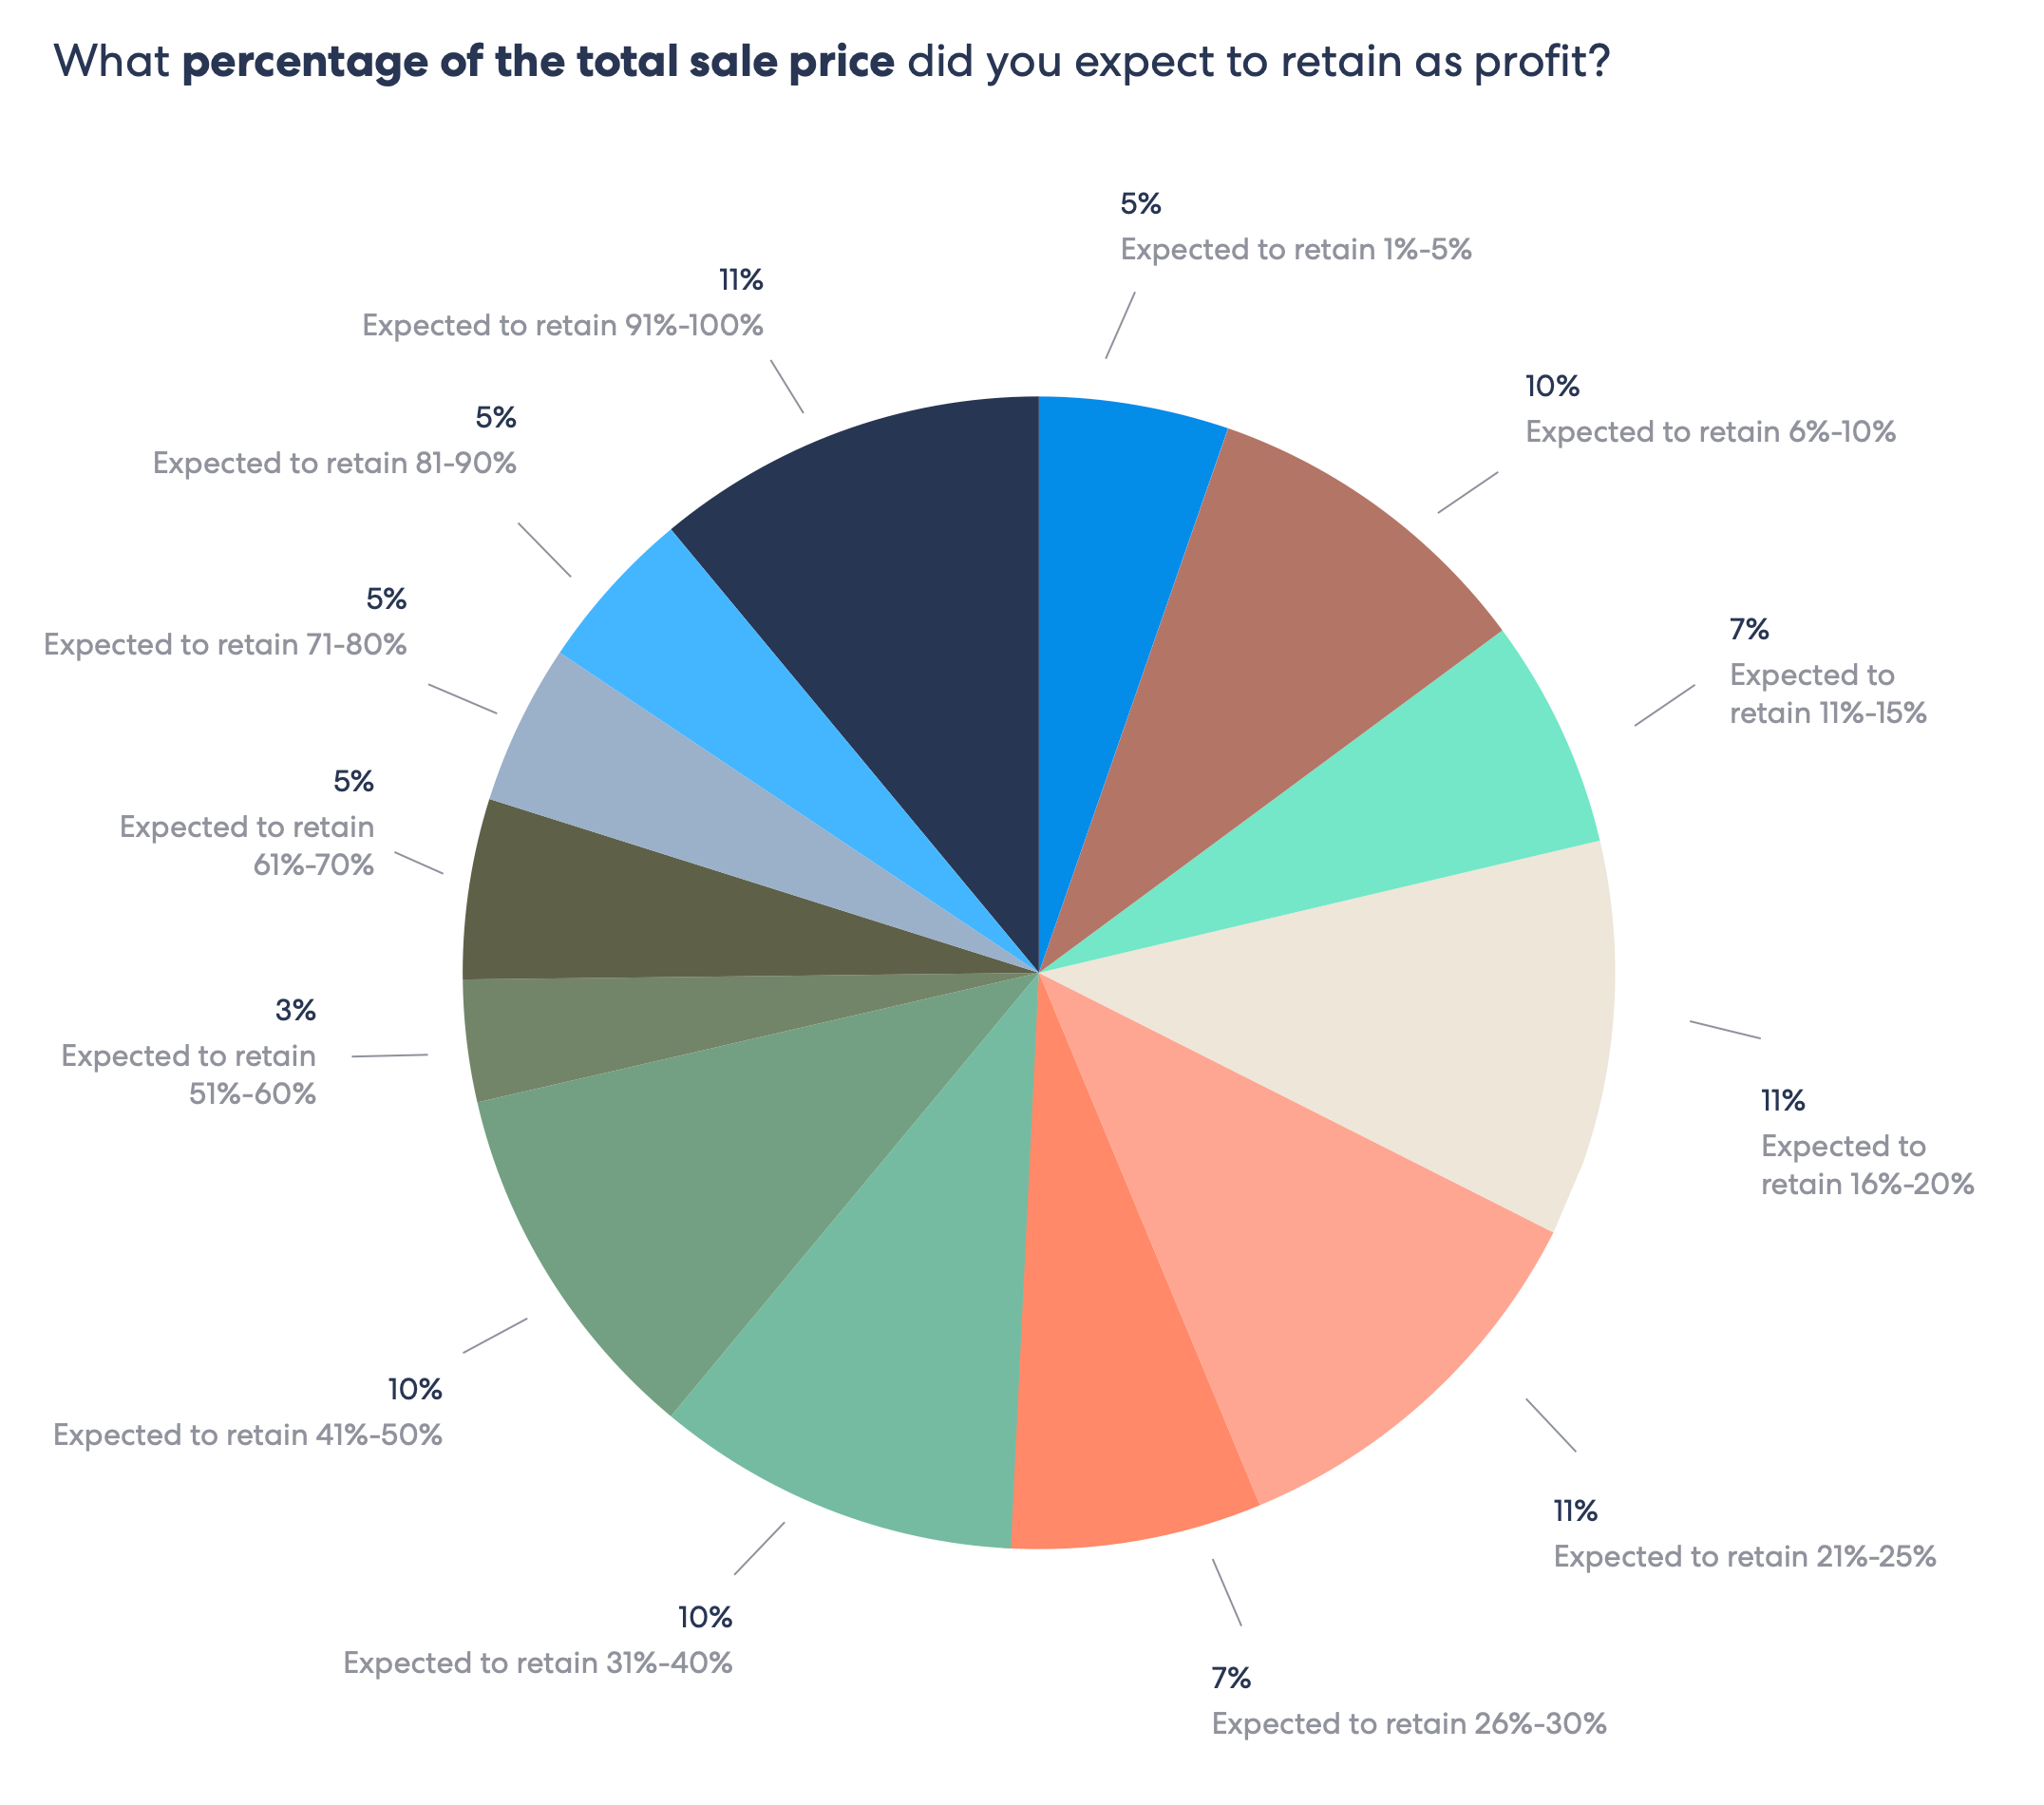 A pie chart showing the percentages of homeowners' expected profits from selling their homes.